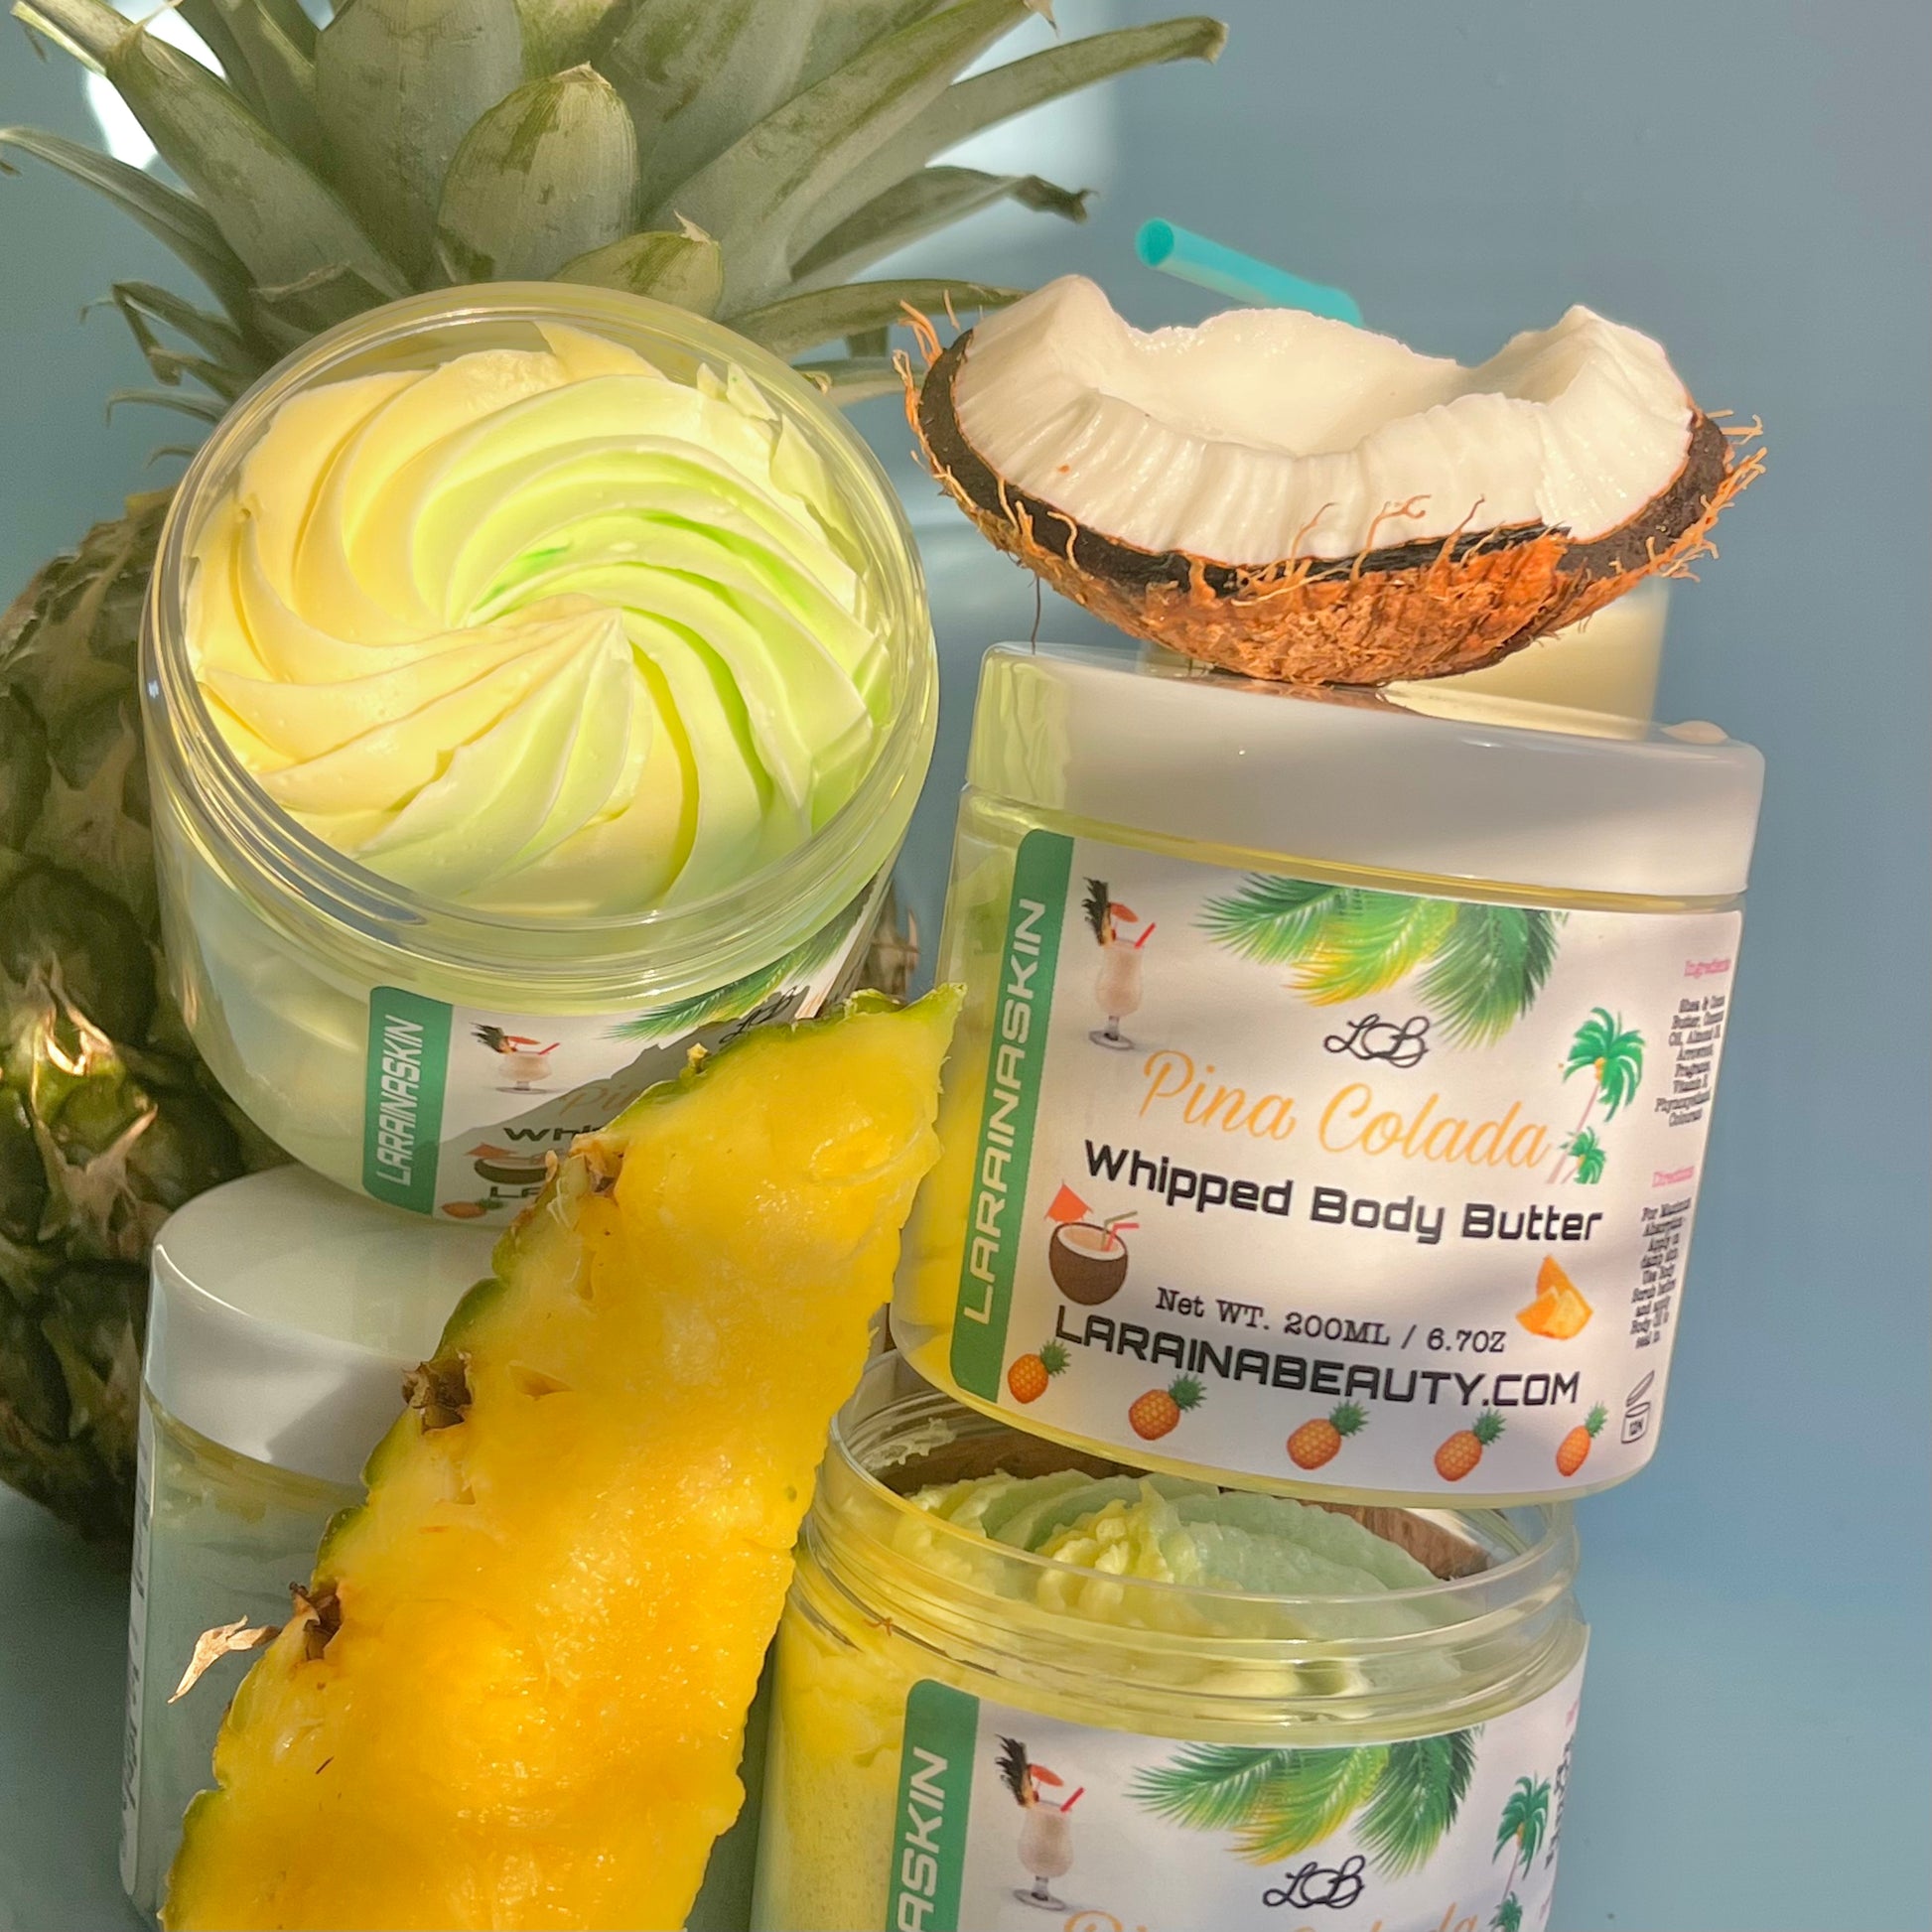 Pina Colada whipped body butter, this juicy fruity flavoured moisturiser is highly moisturising and ideal for all skin types especially dry skin,